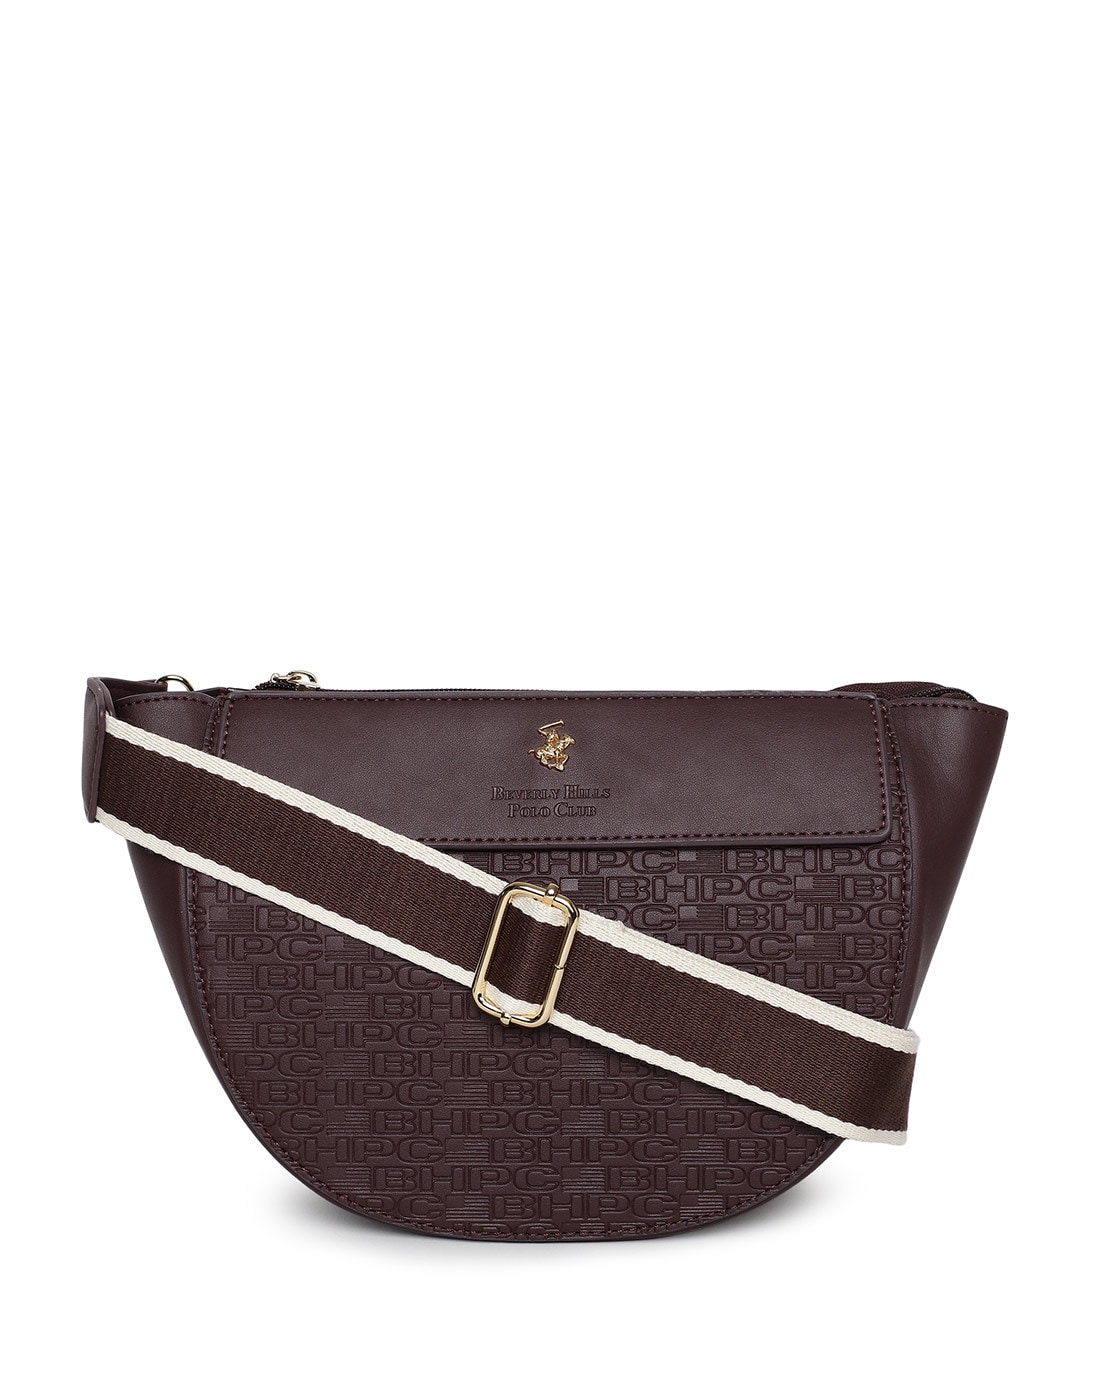 Beverly Hills Polo Club Women Shoulder Bags Styles, Prices - Trendyol